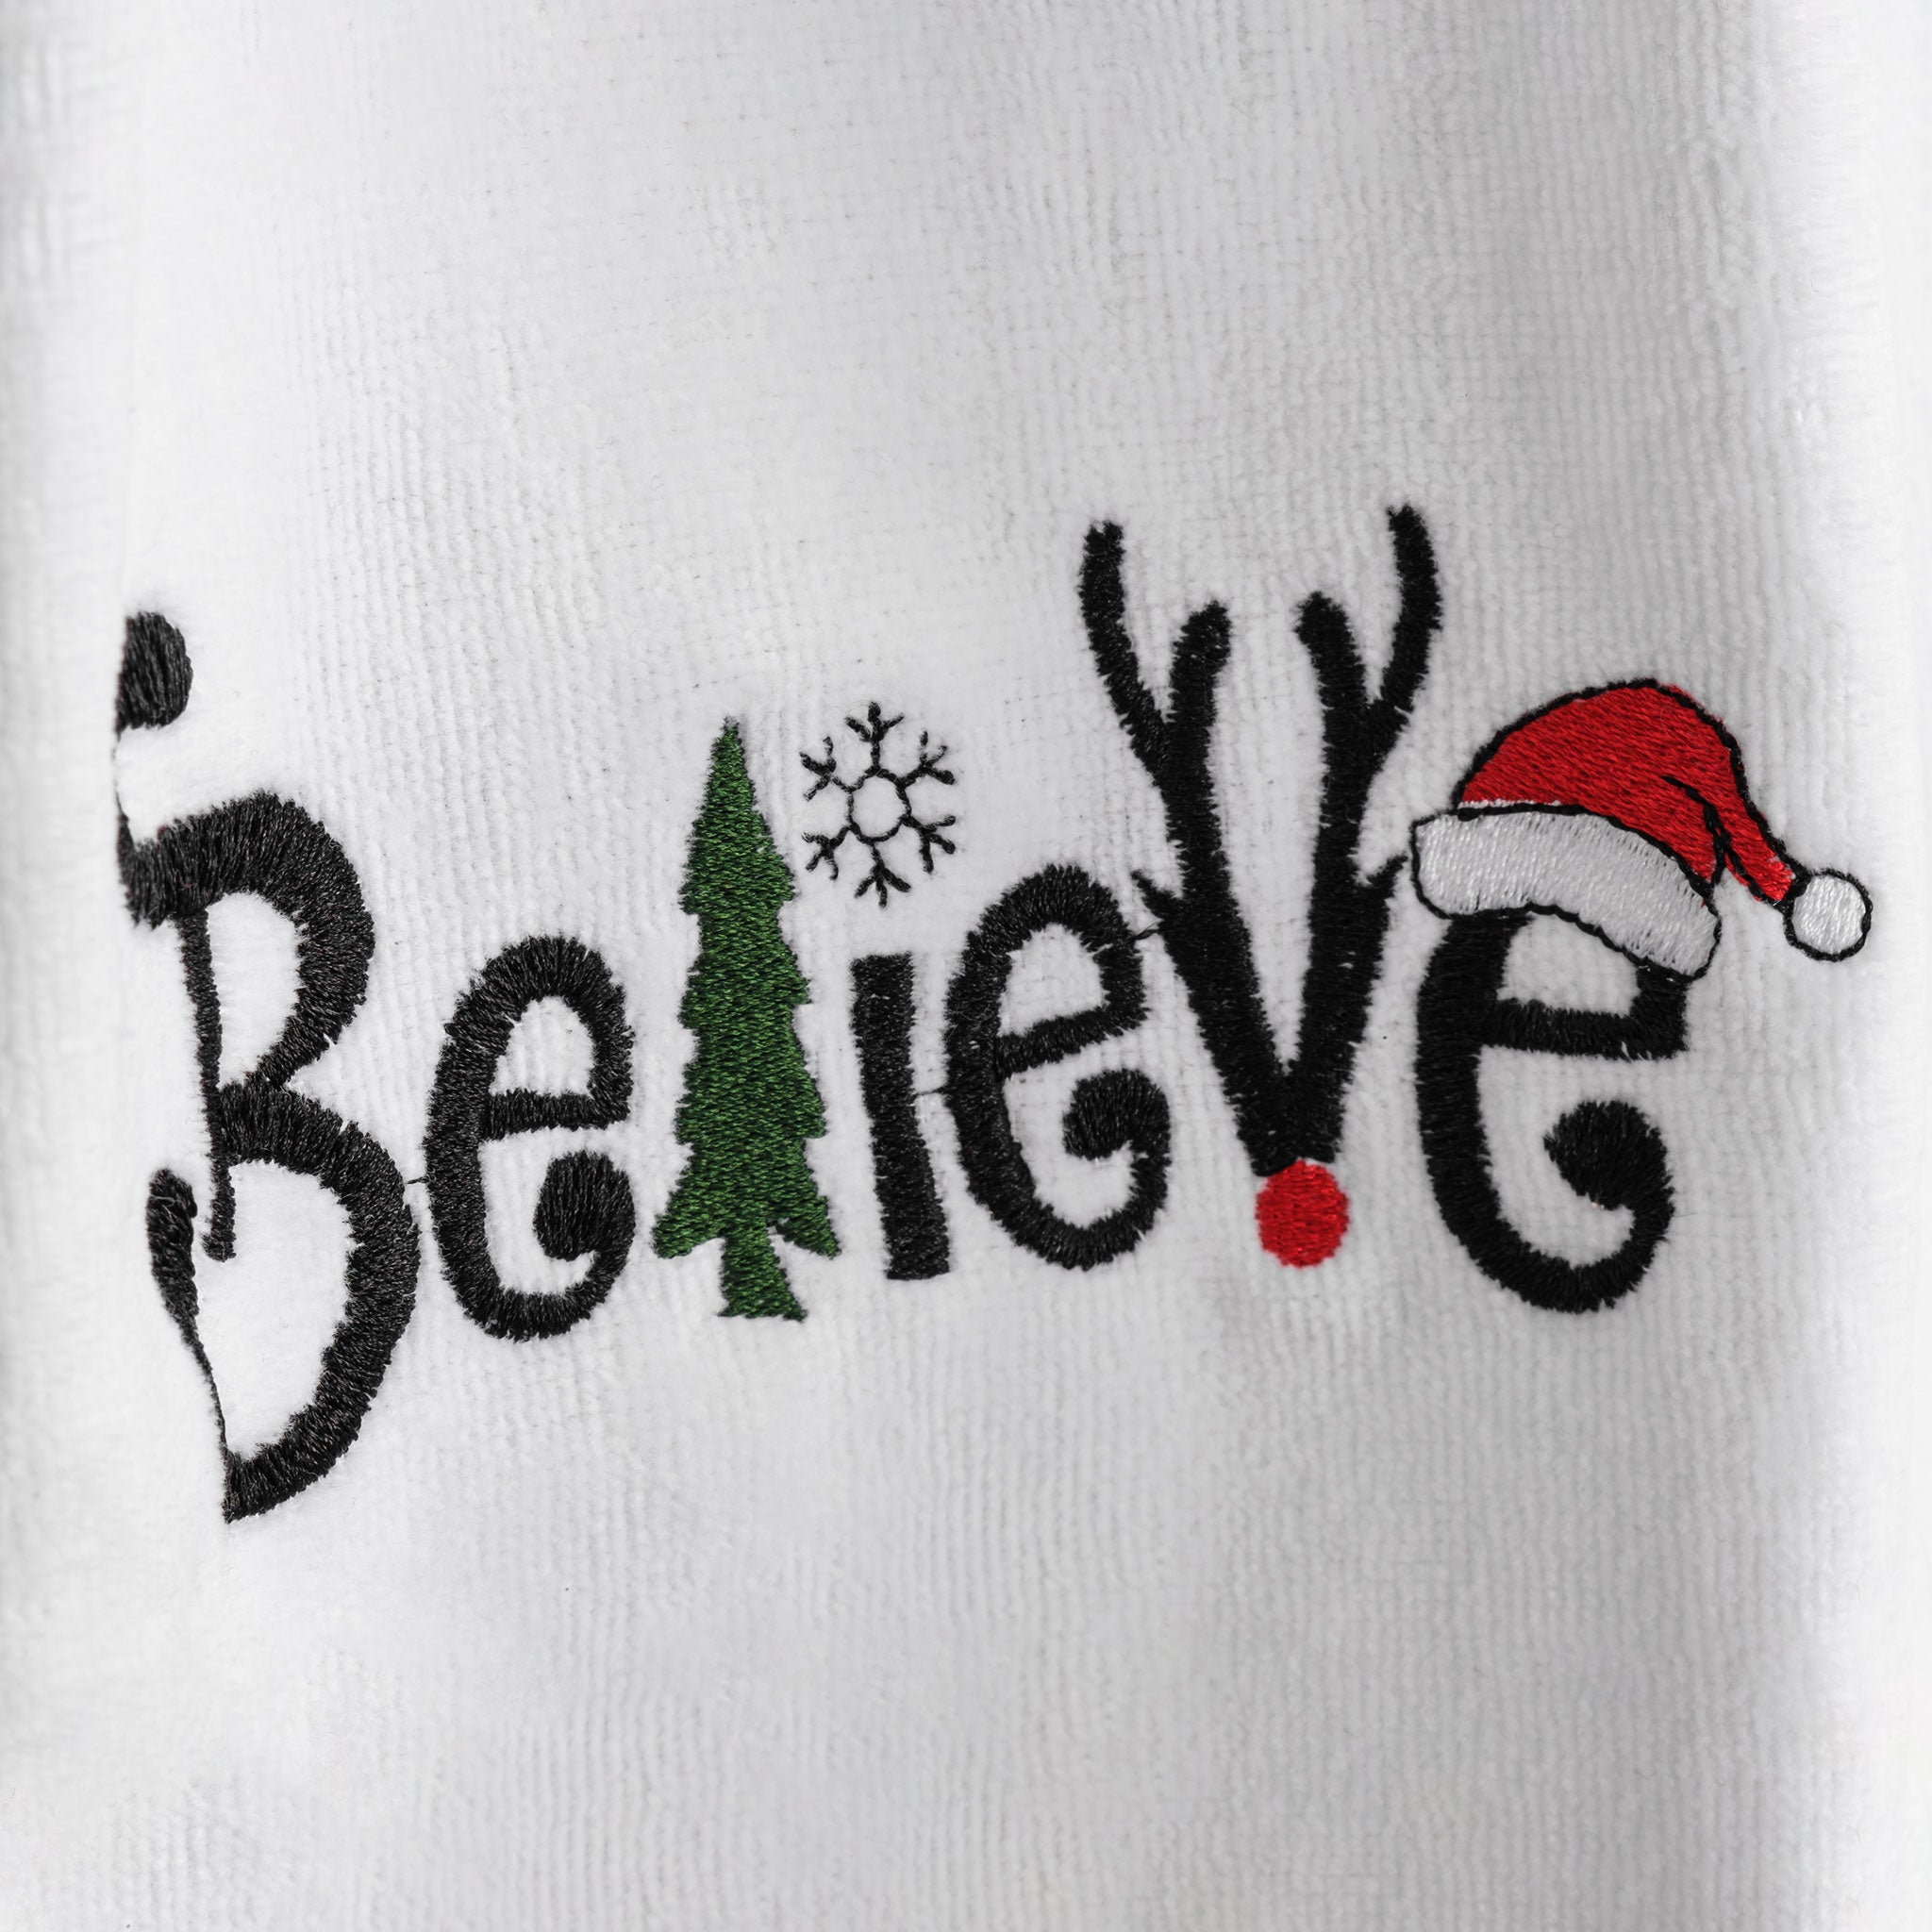 American Soft Linen - Christmas Towels 2  Packed Embroidered Towels for Decor Xmas - 60 Set Case Pack - Joy-Believe - 4